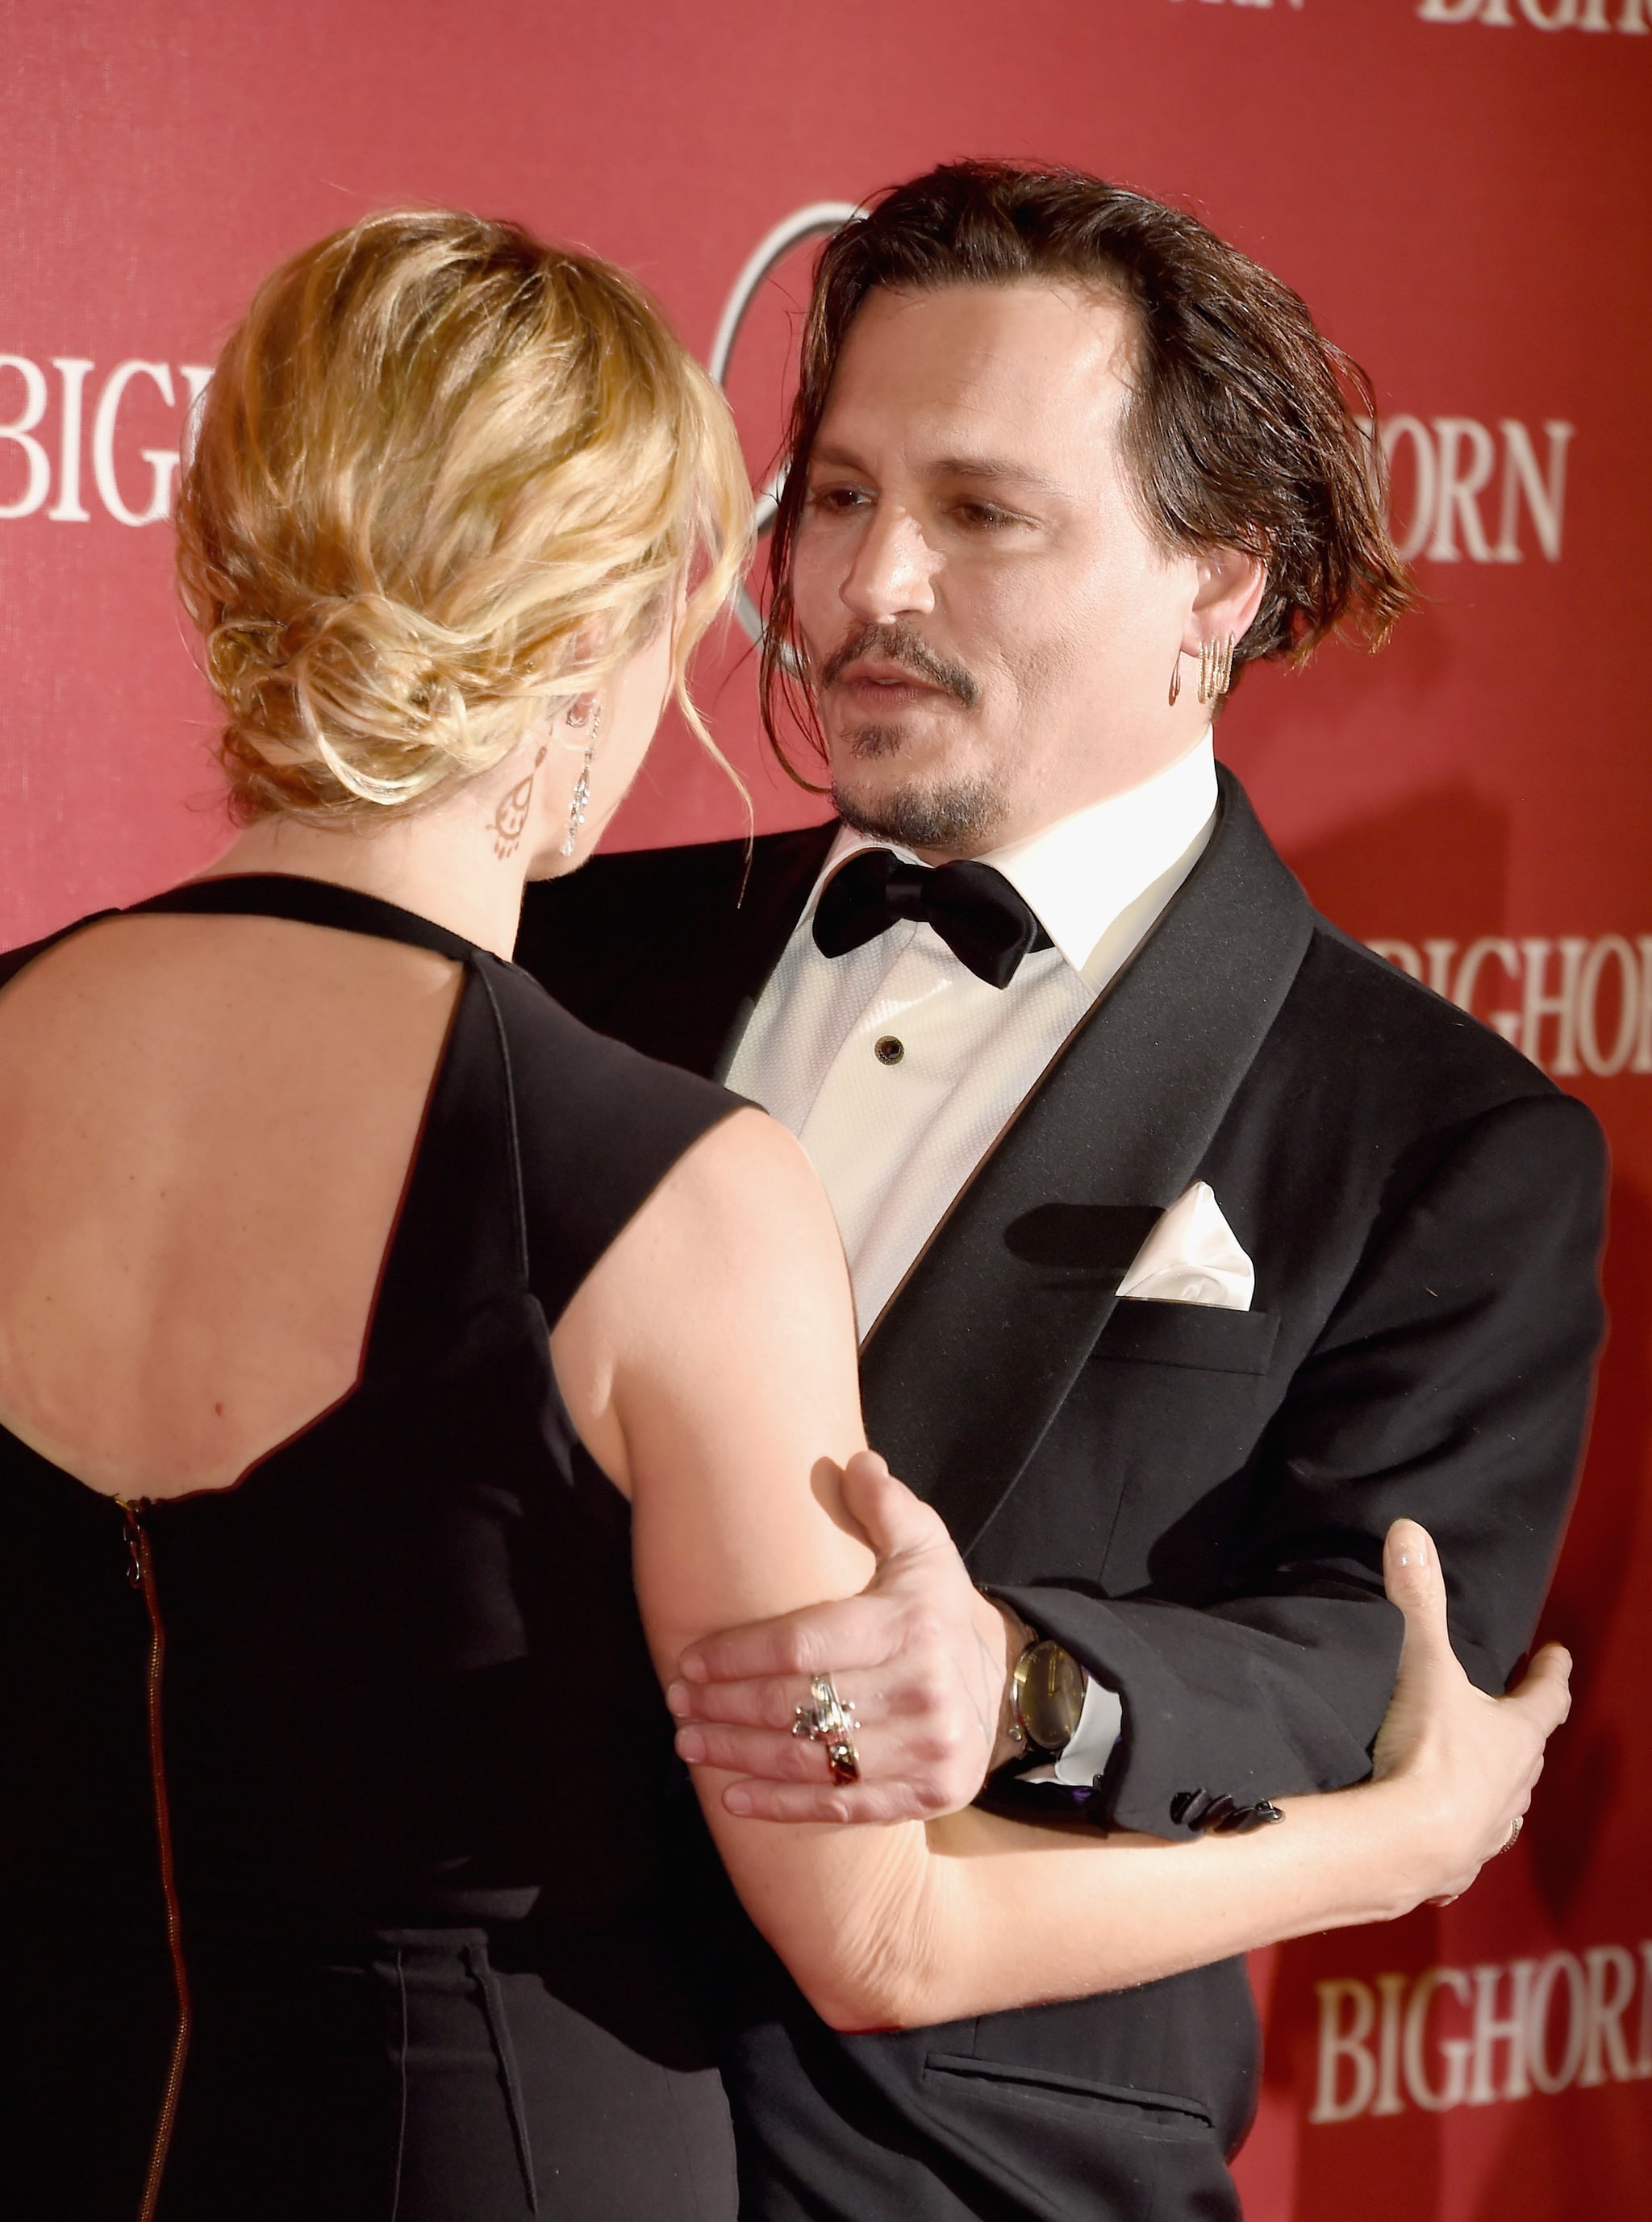 Pictured: Kate Winslet and Johnny Depp | Johnny Depp and Kate Winslet Have an Incredibly Charming Red Carpet | POPSUGAR Celebrity Photo